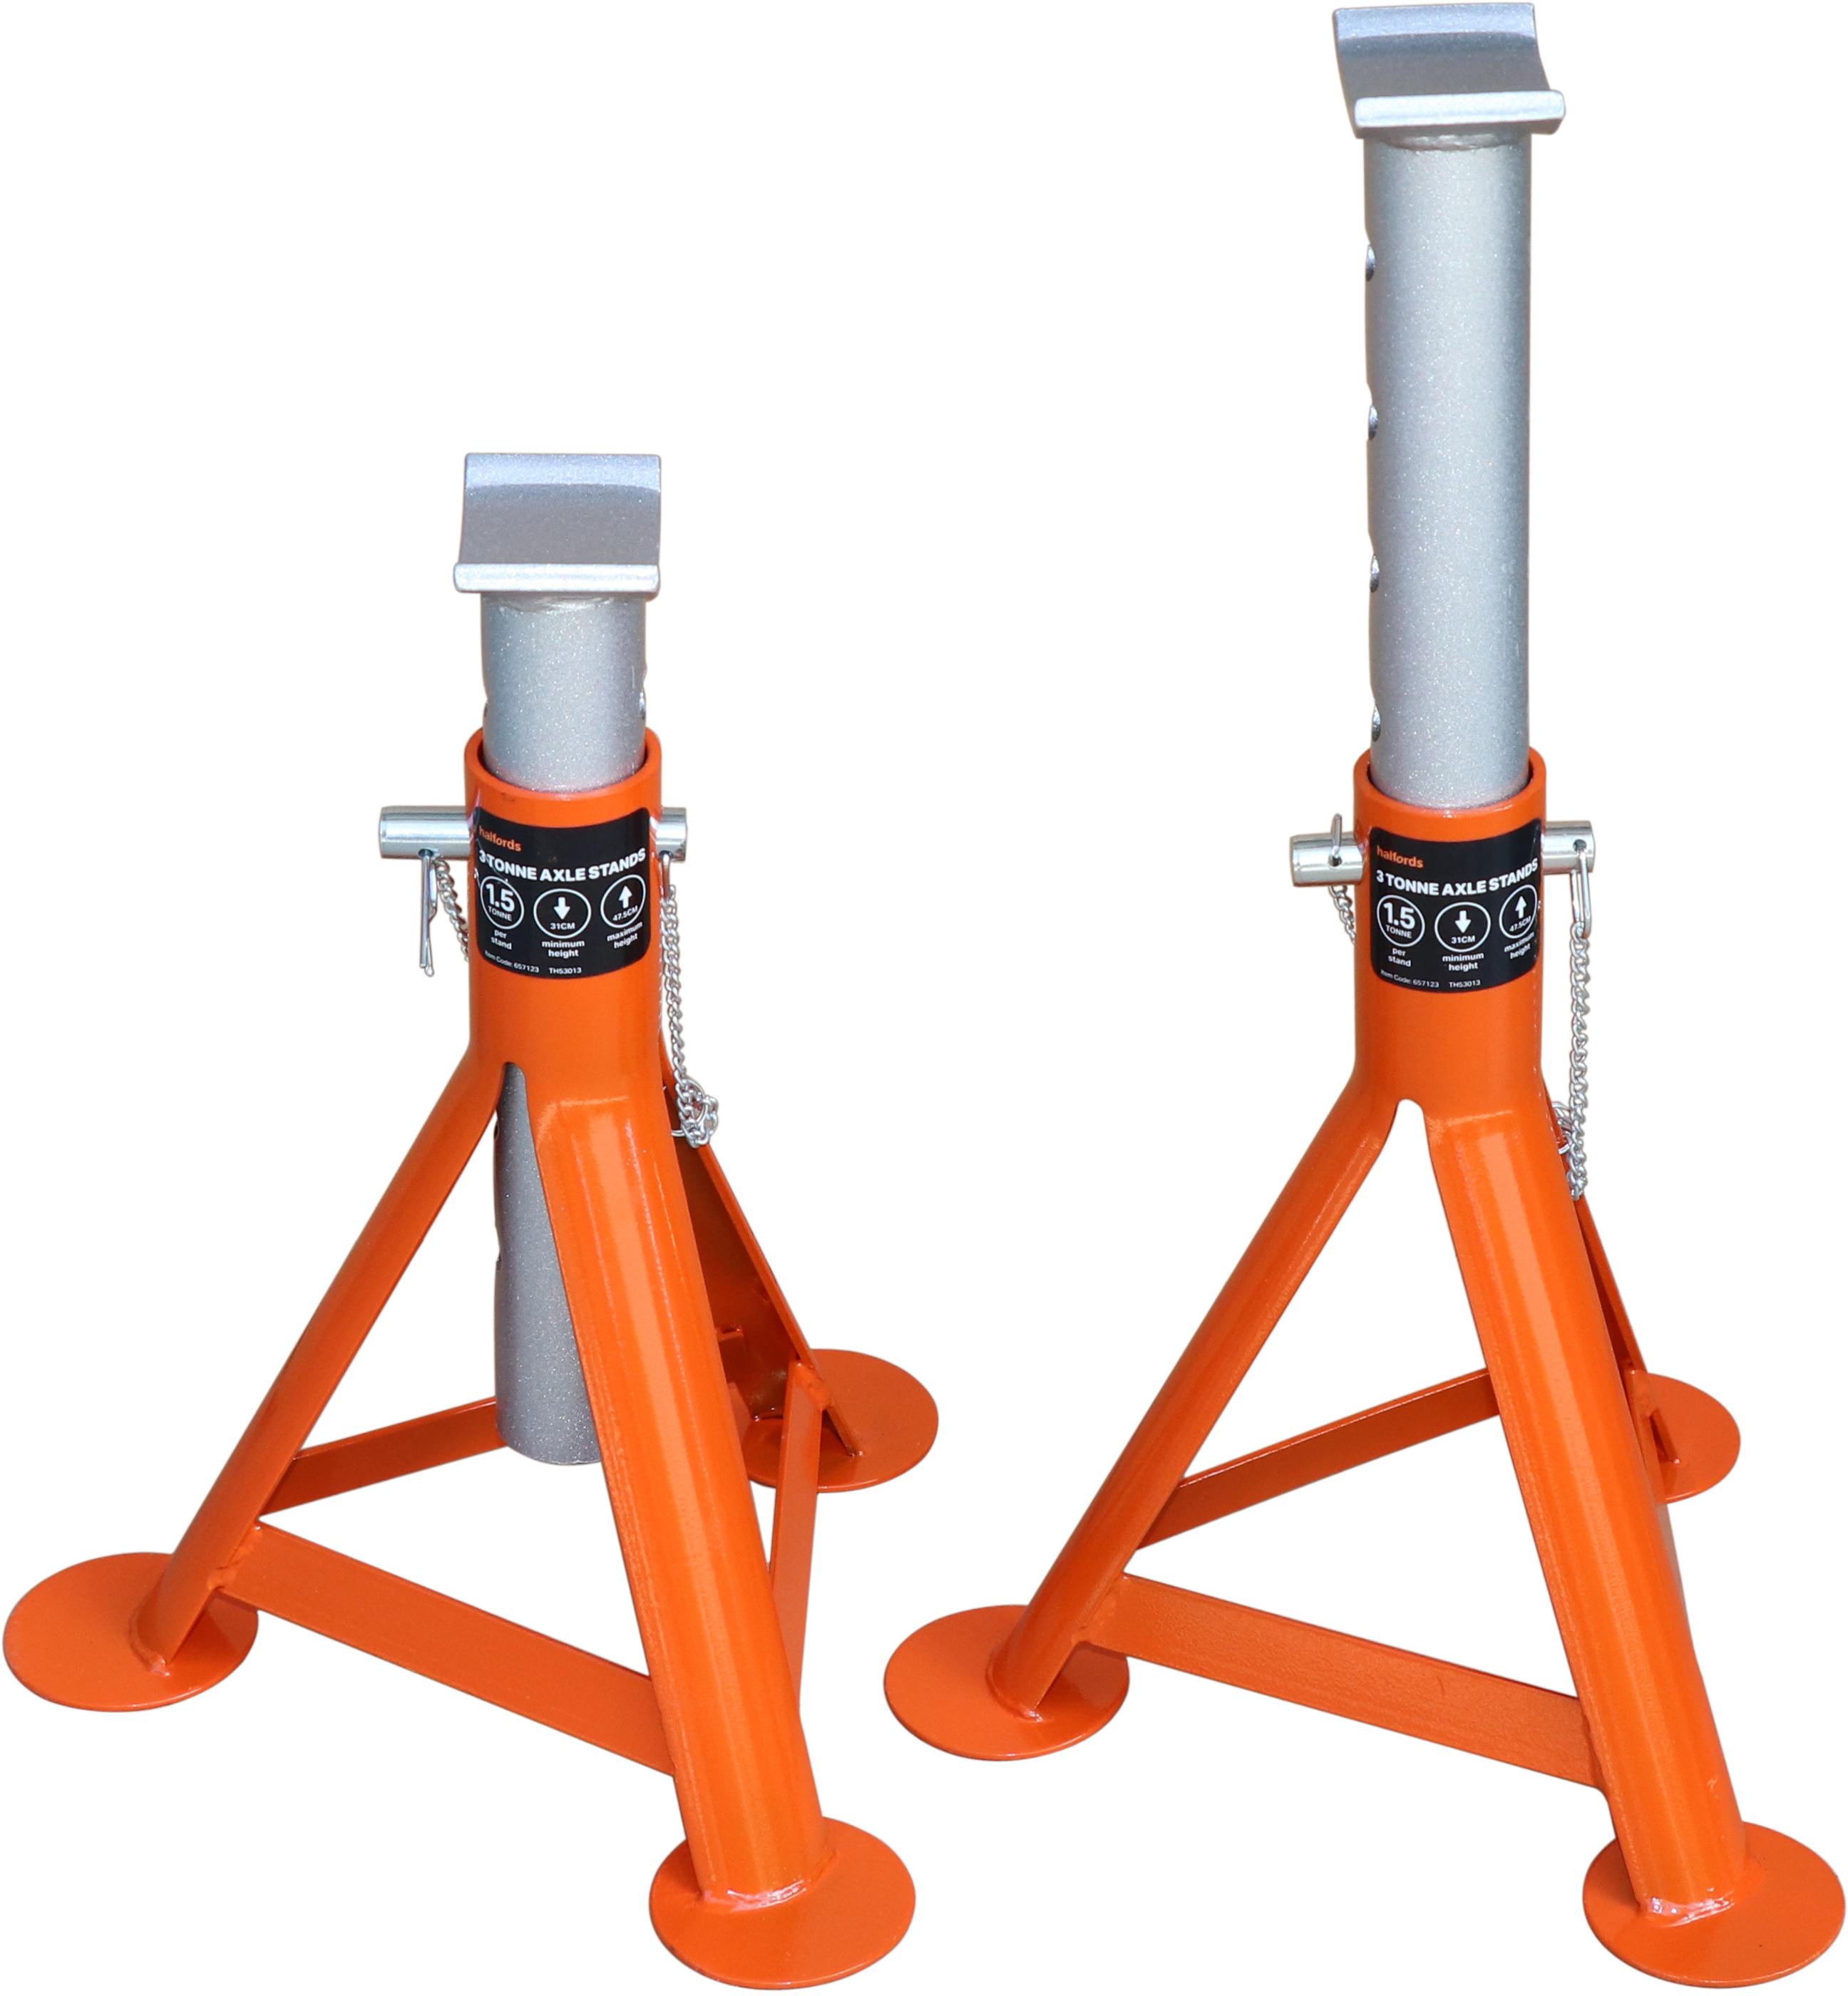 Halfords 3 Tonne Axle Stands